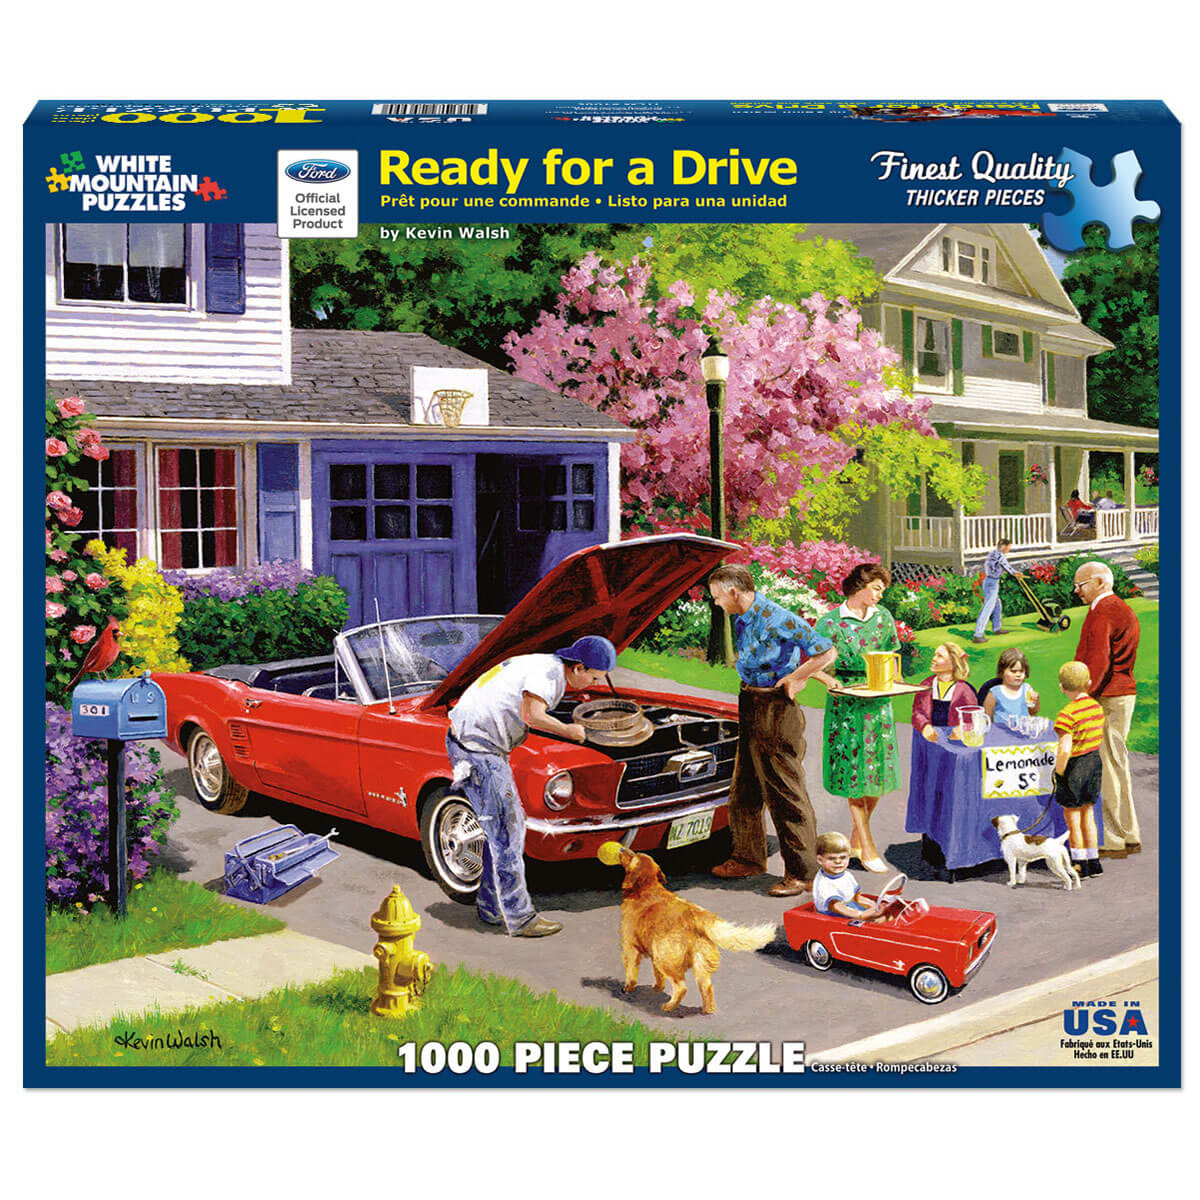 White Mountain Puzzles Ready for a Drive 1000 Piece Jigsaw Puzzle